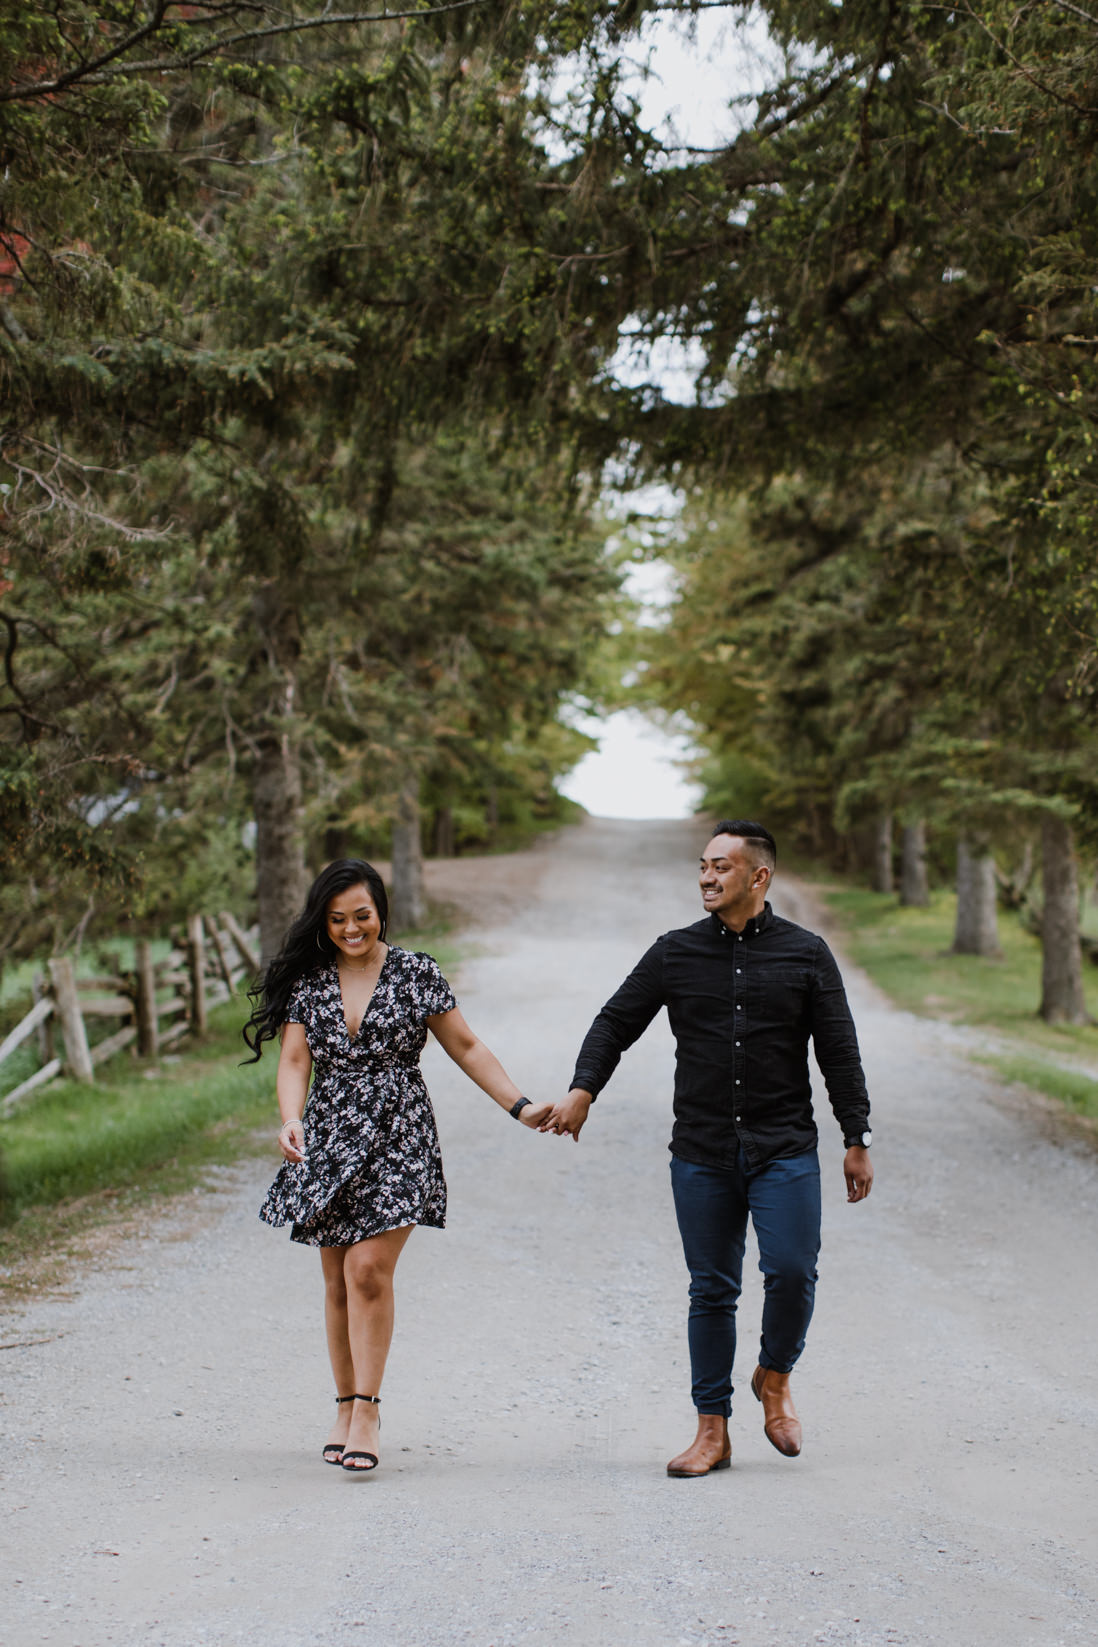 spring scotsdale farm engagement georgetown_EightyFifth Street Photography